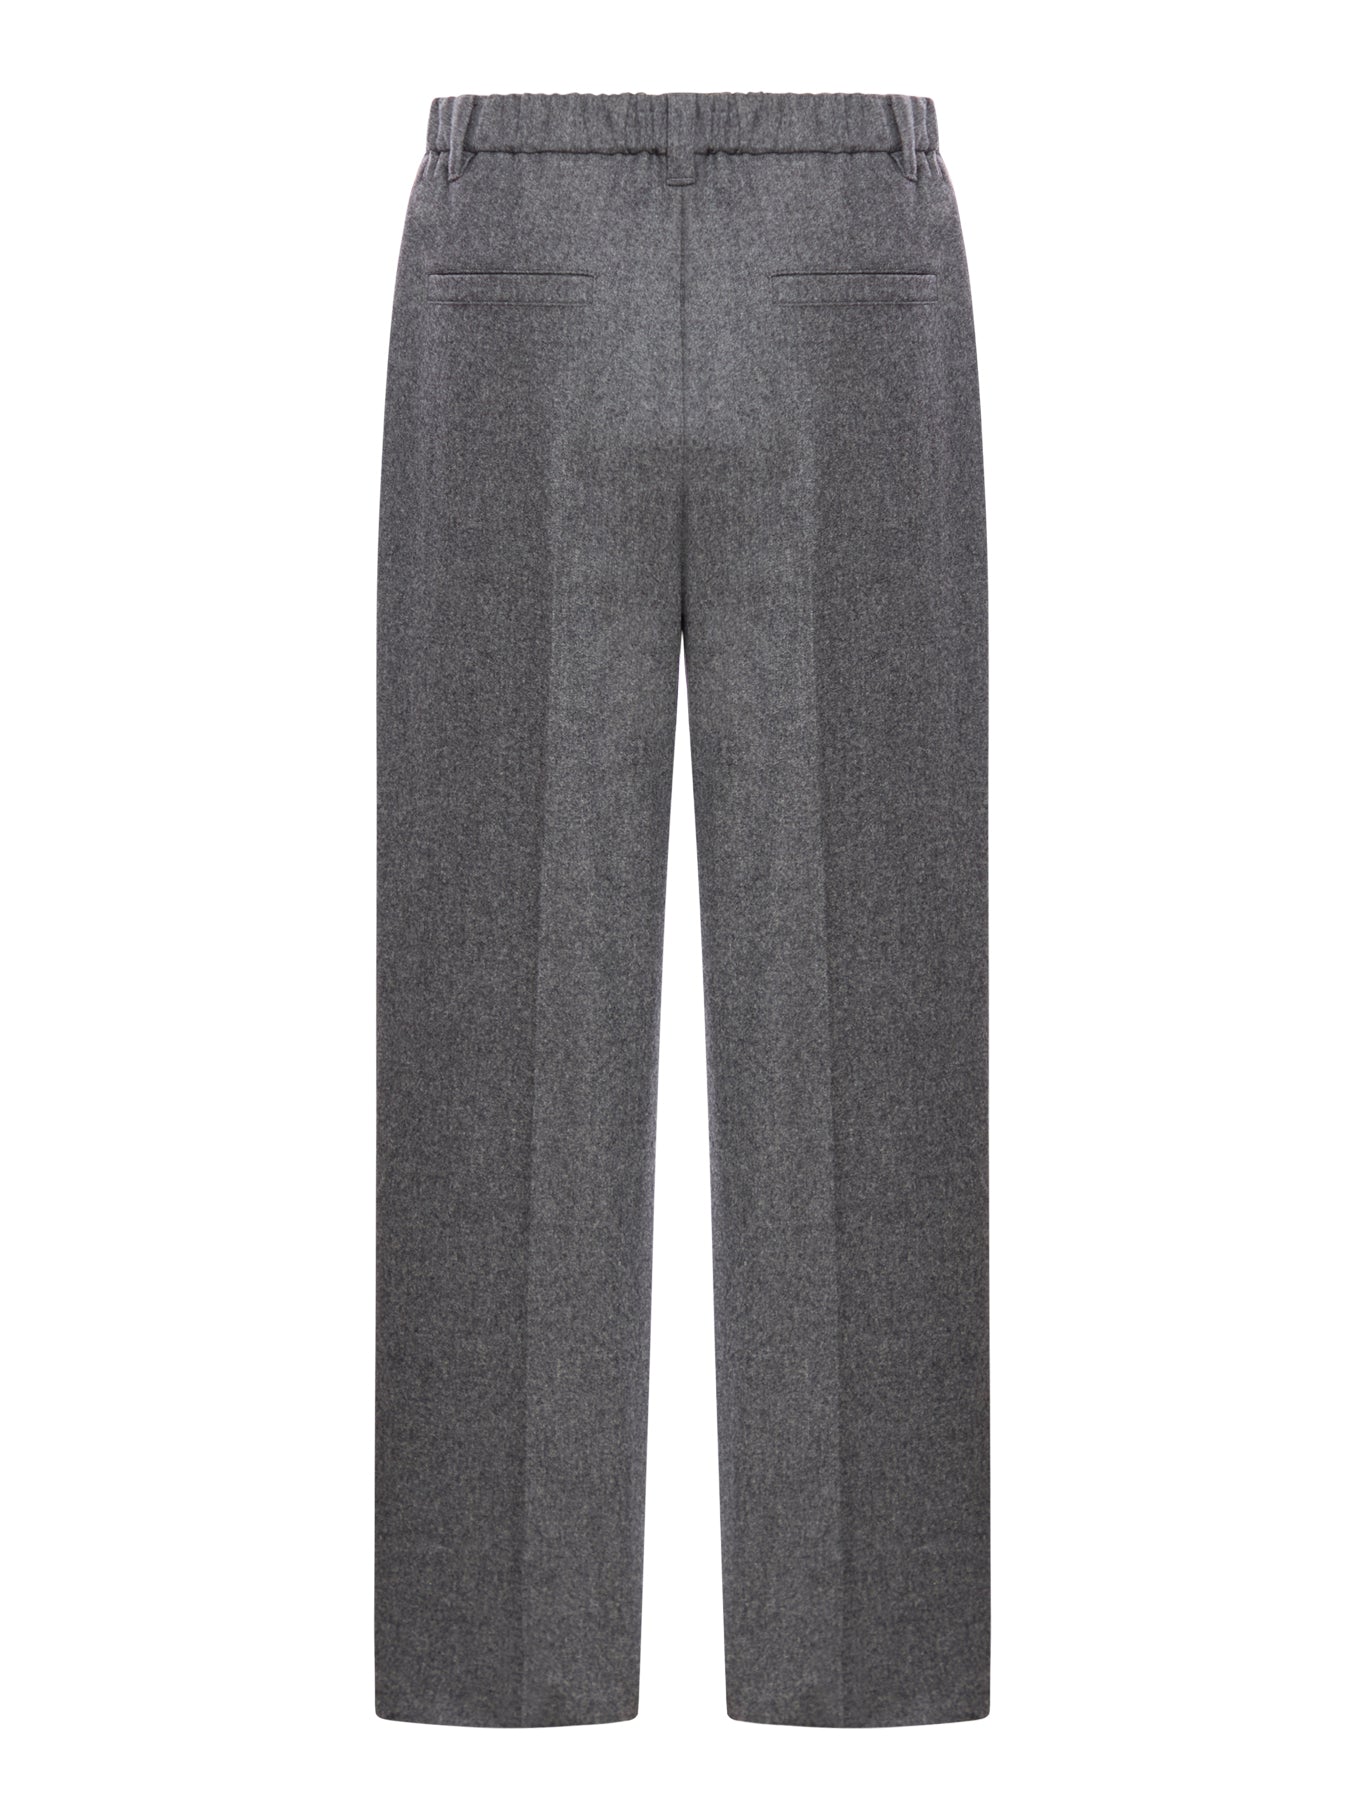 TROUSERS WITH DARTS